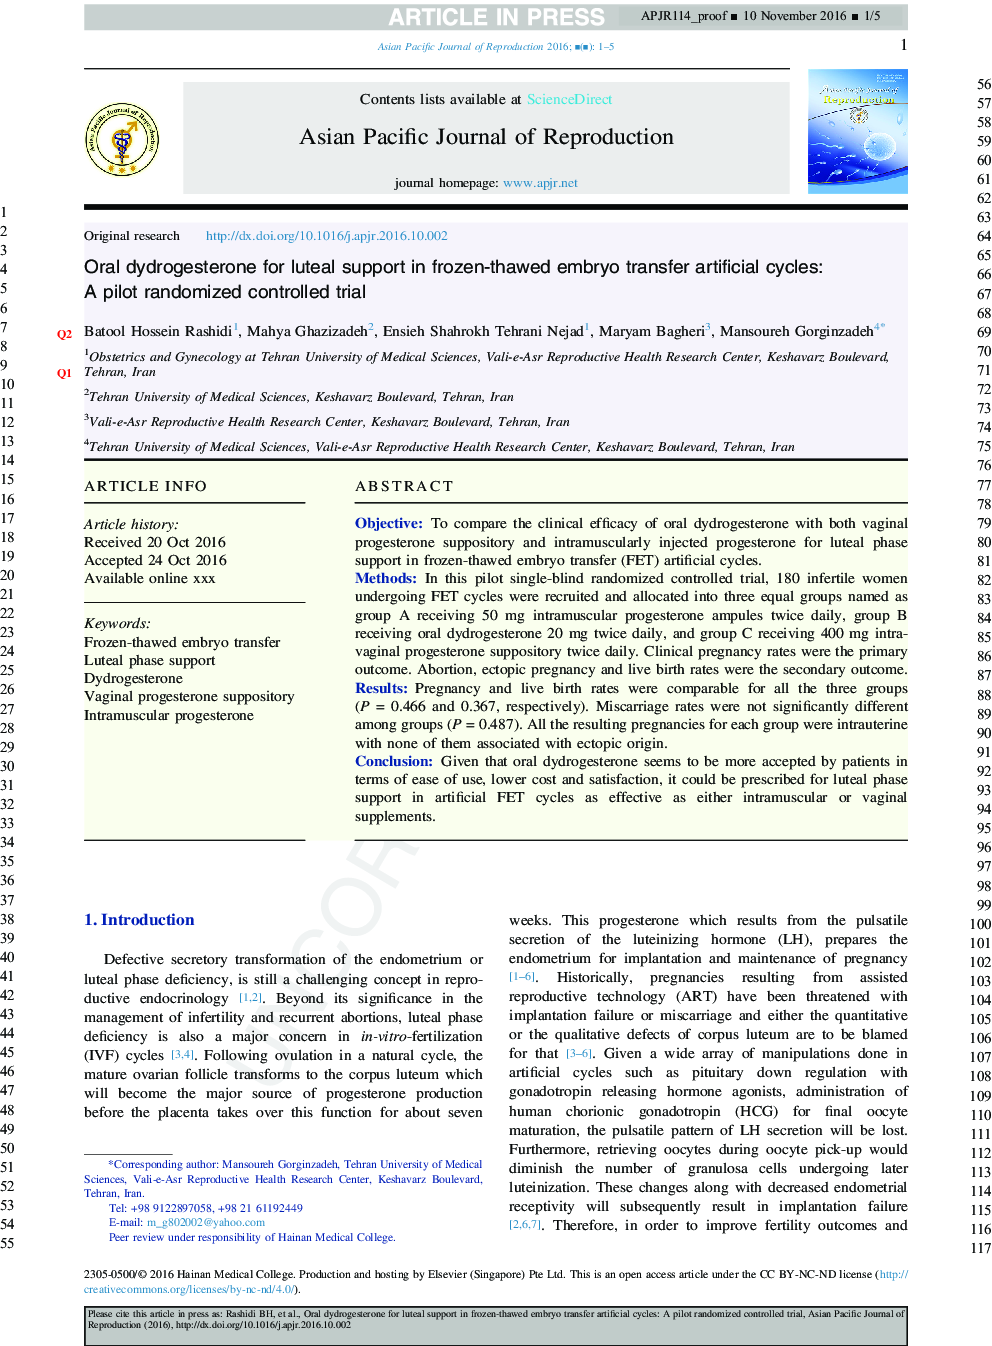 Oral dydrogesterone for luteal support in frozen-thawed embryo transfer artificial cycles: A pilot randomized controlled trial